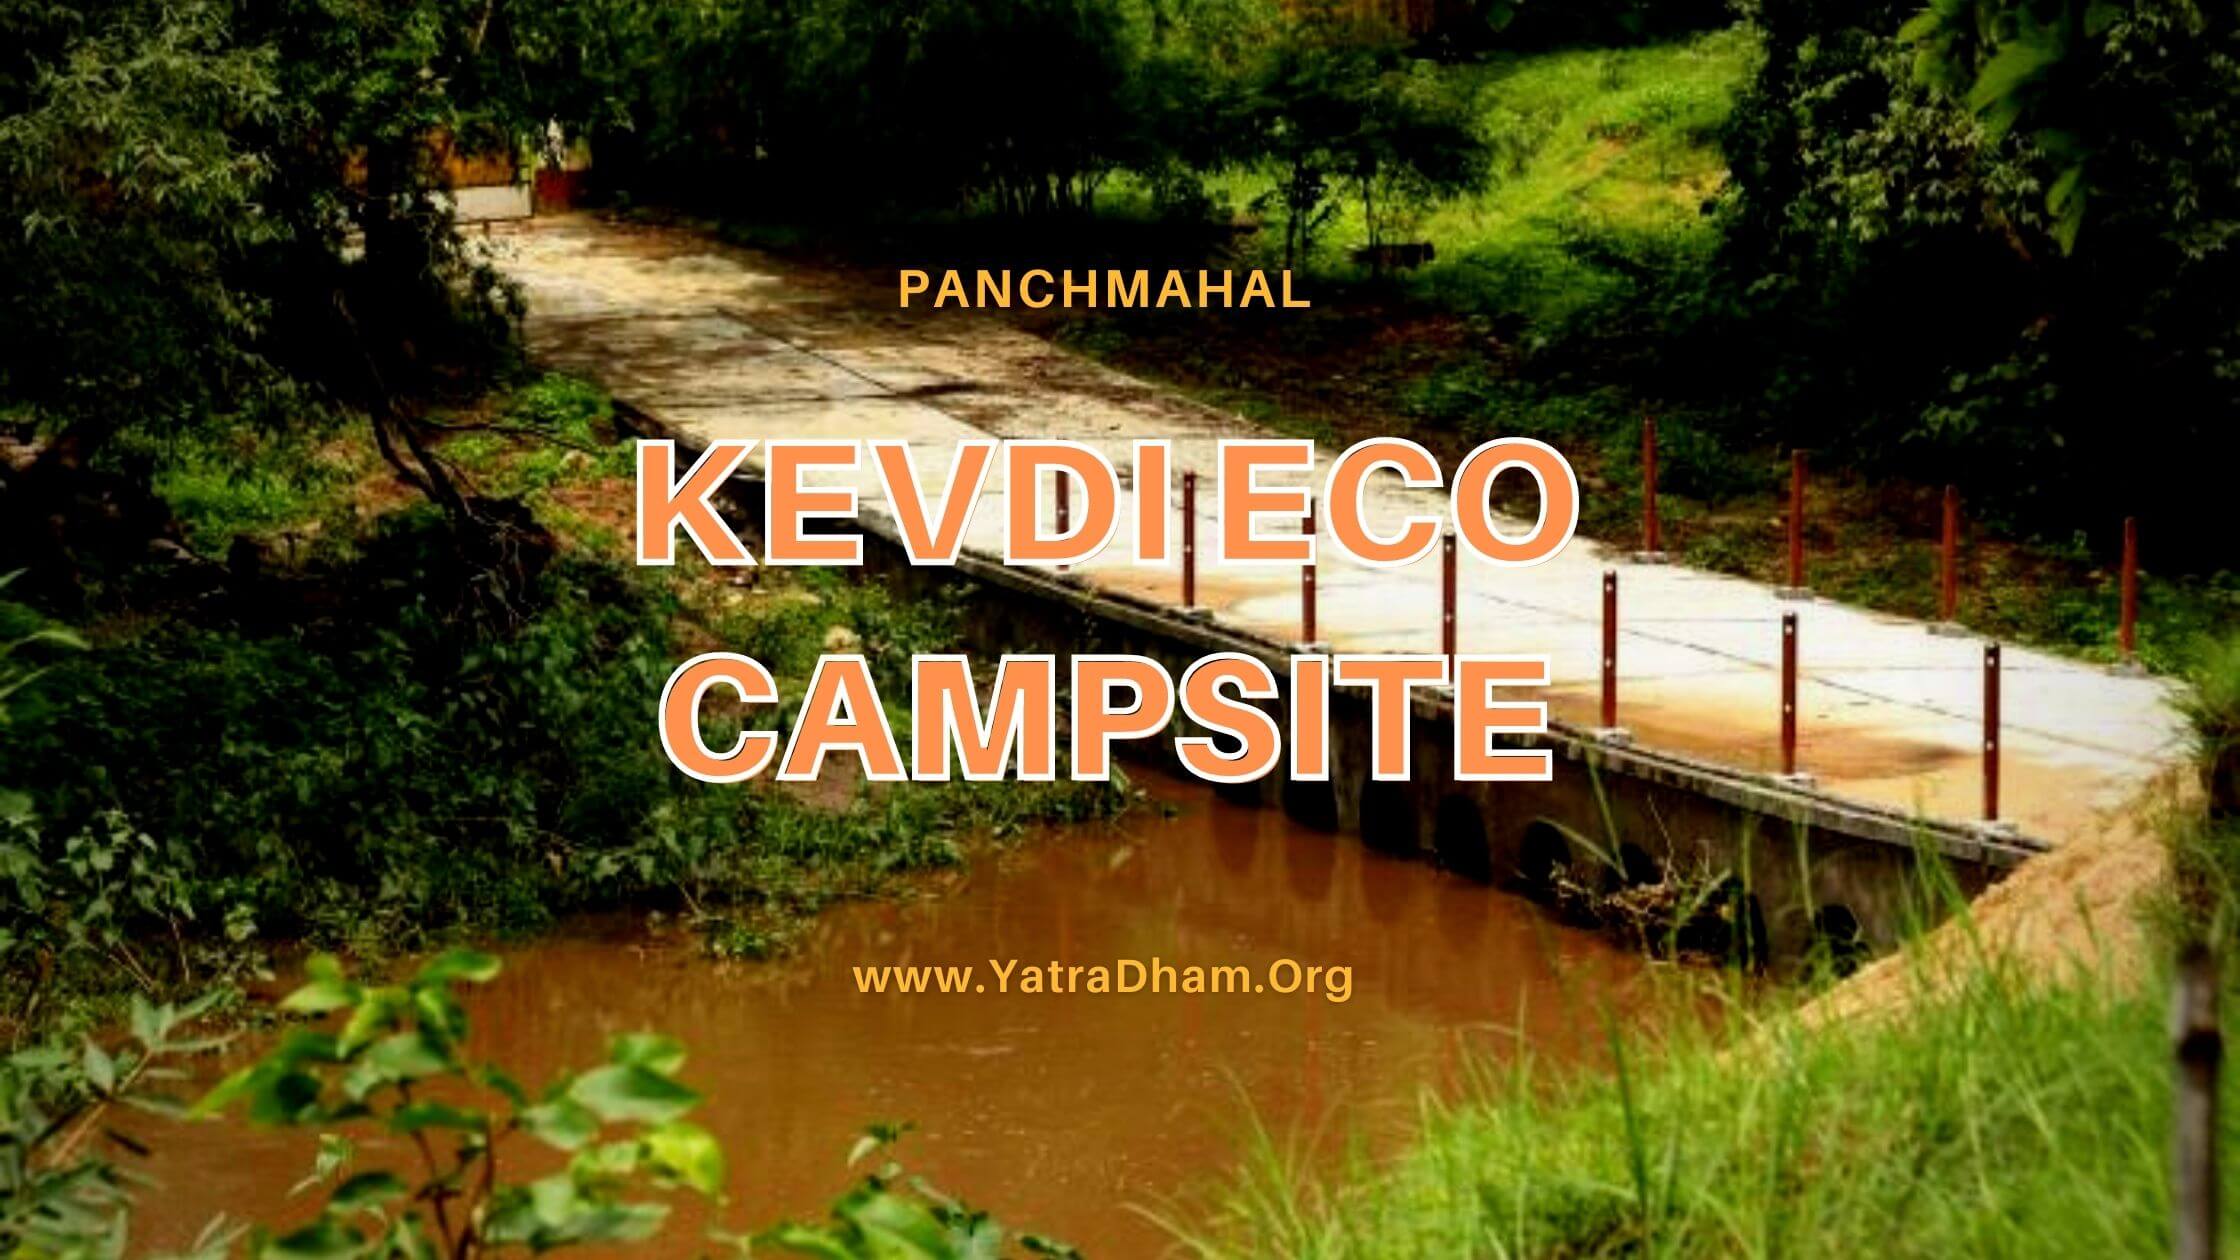 Kevdi Eco Campsite - Panchmahal